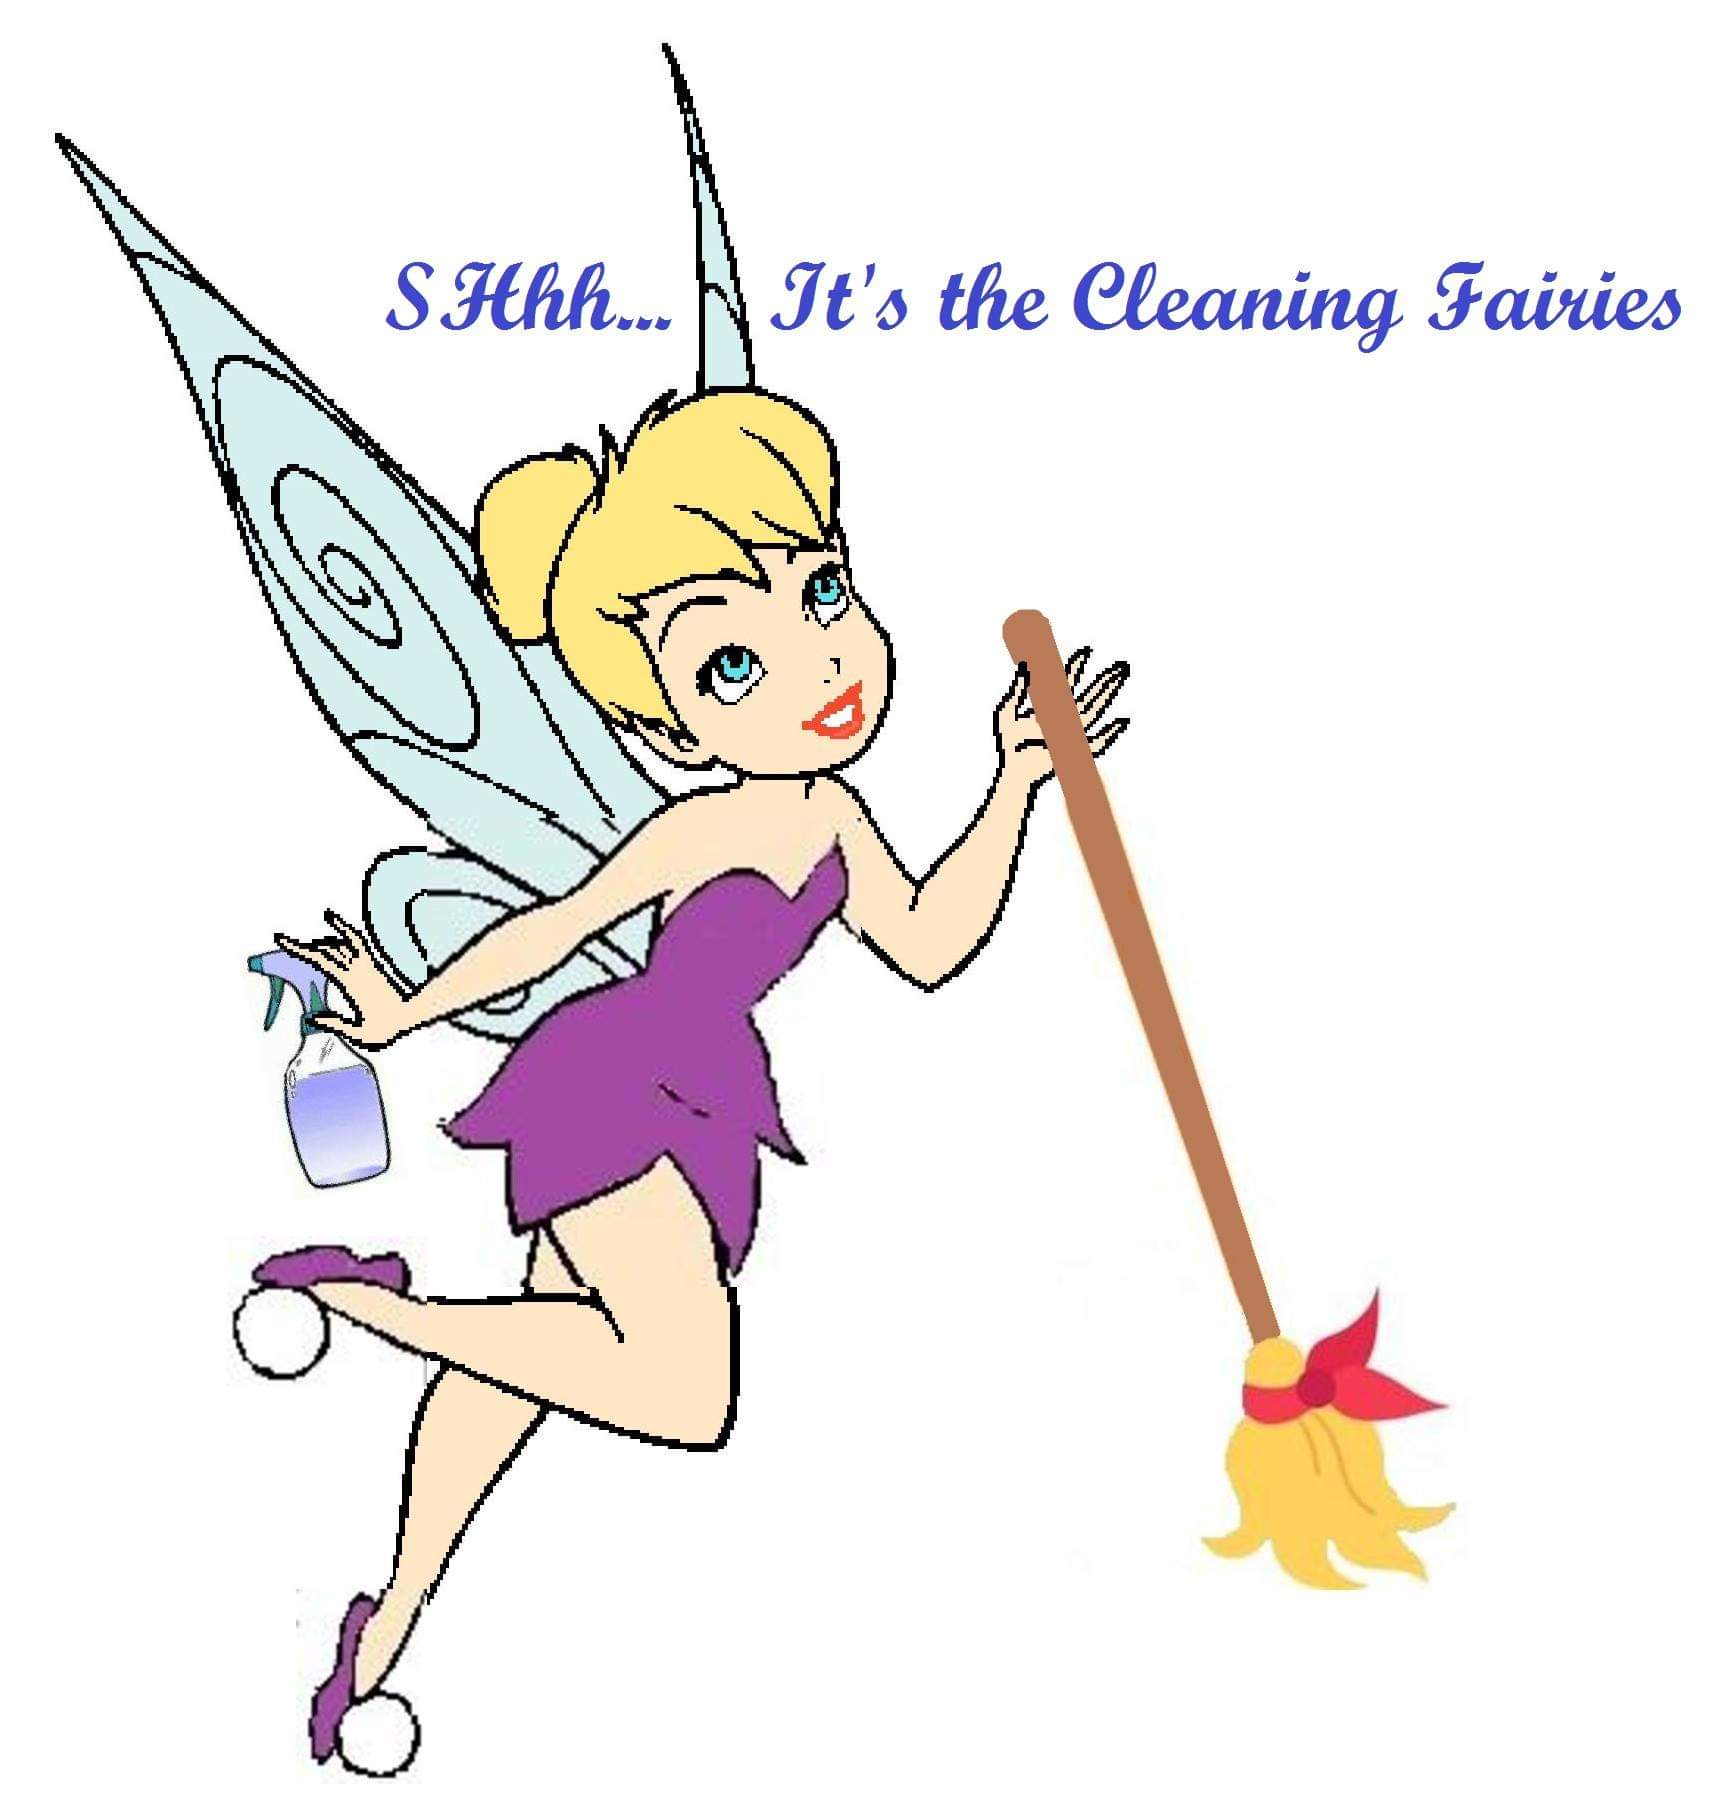 SHhh...it's The Cleaning Fairies